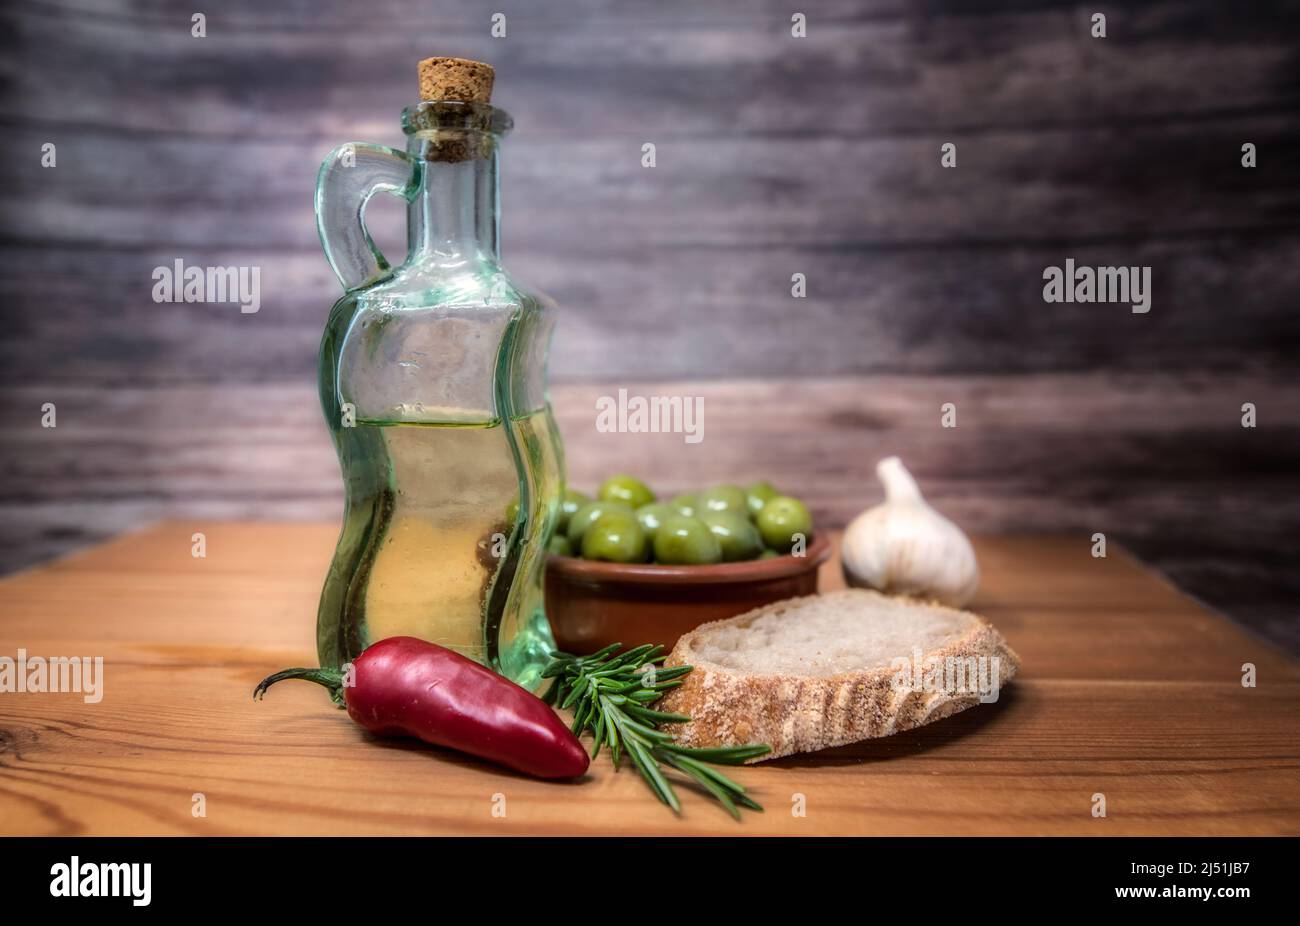 Table top still life of ovlive oil, green olives, red chilly, sprig of rosemary, garlic and bread in a rustic setting. Stock Photo